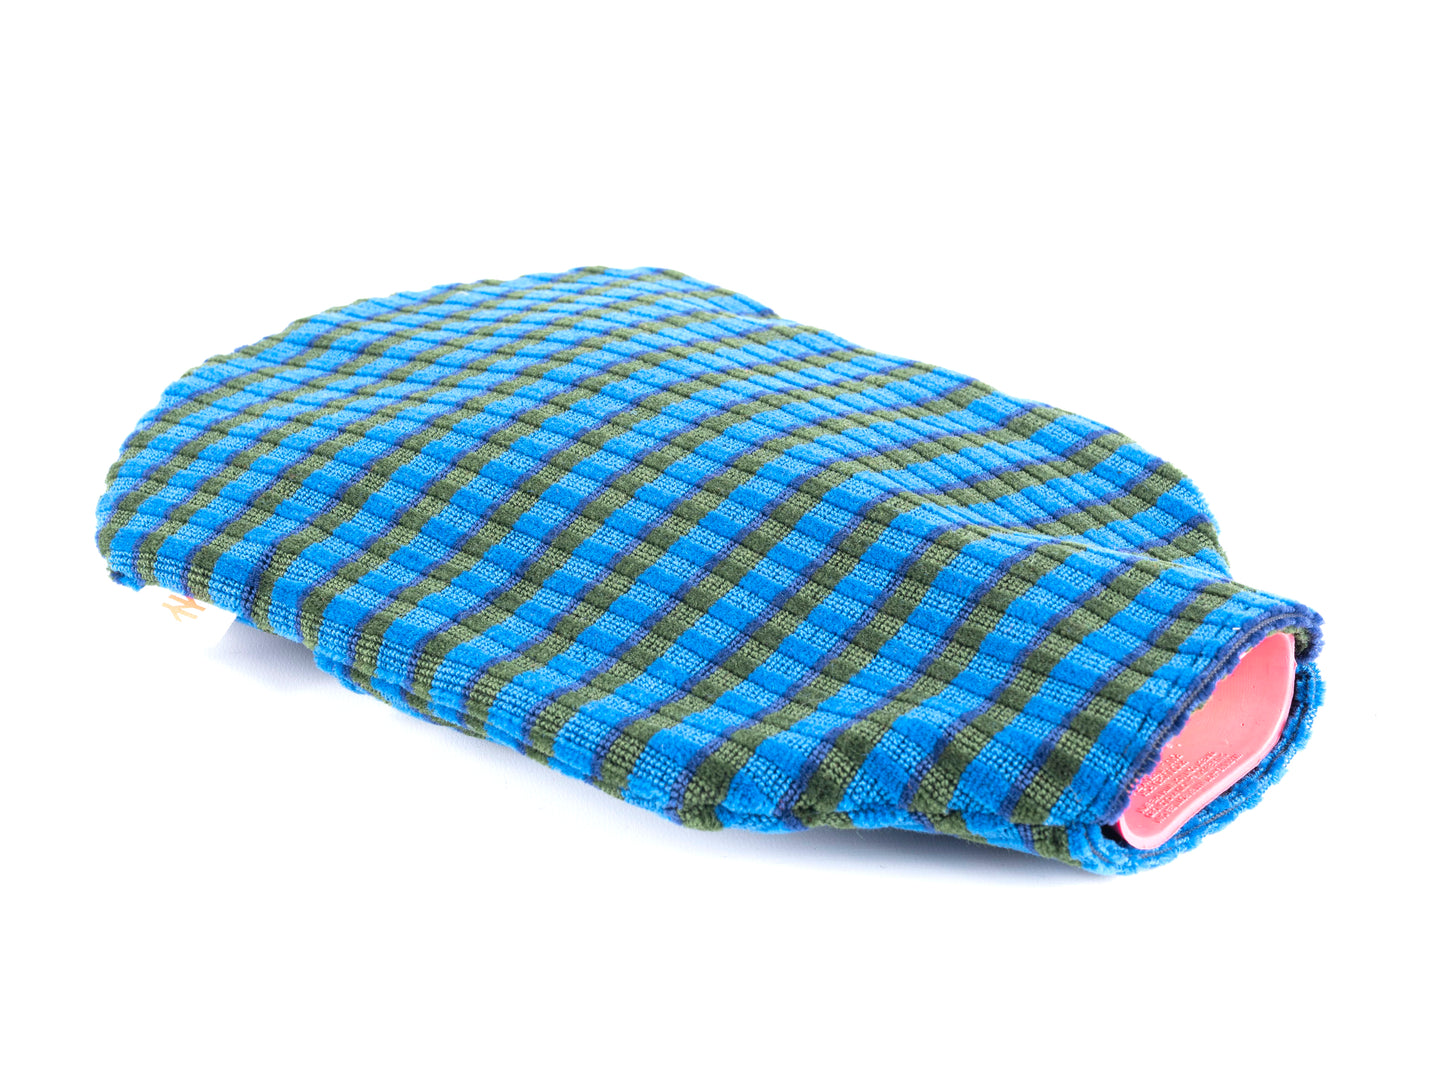 British Rail Bournemouth Blue Moquette Hot Water Bottle Cover